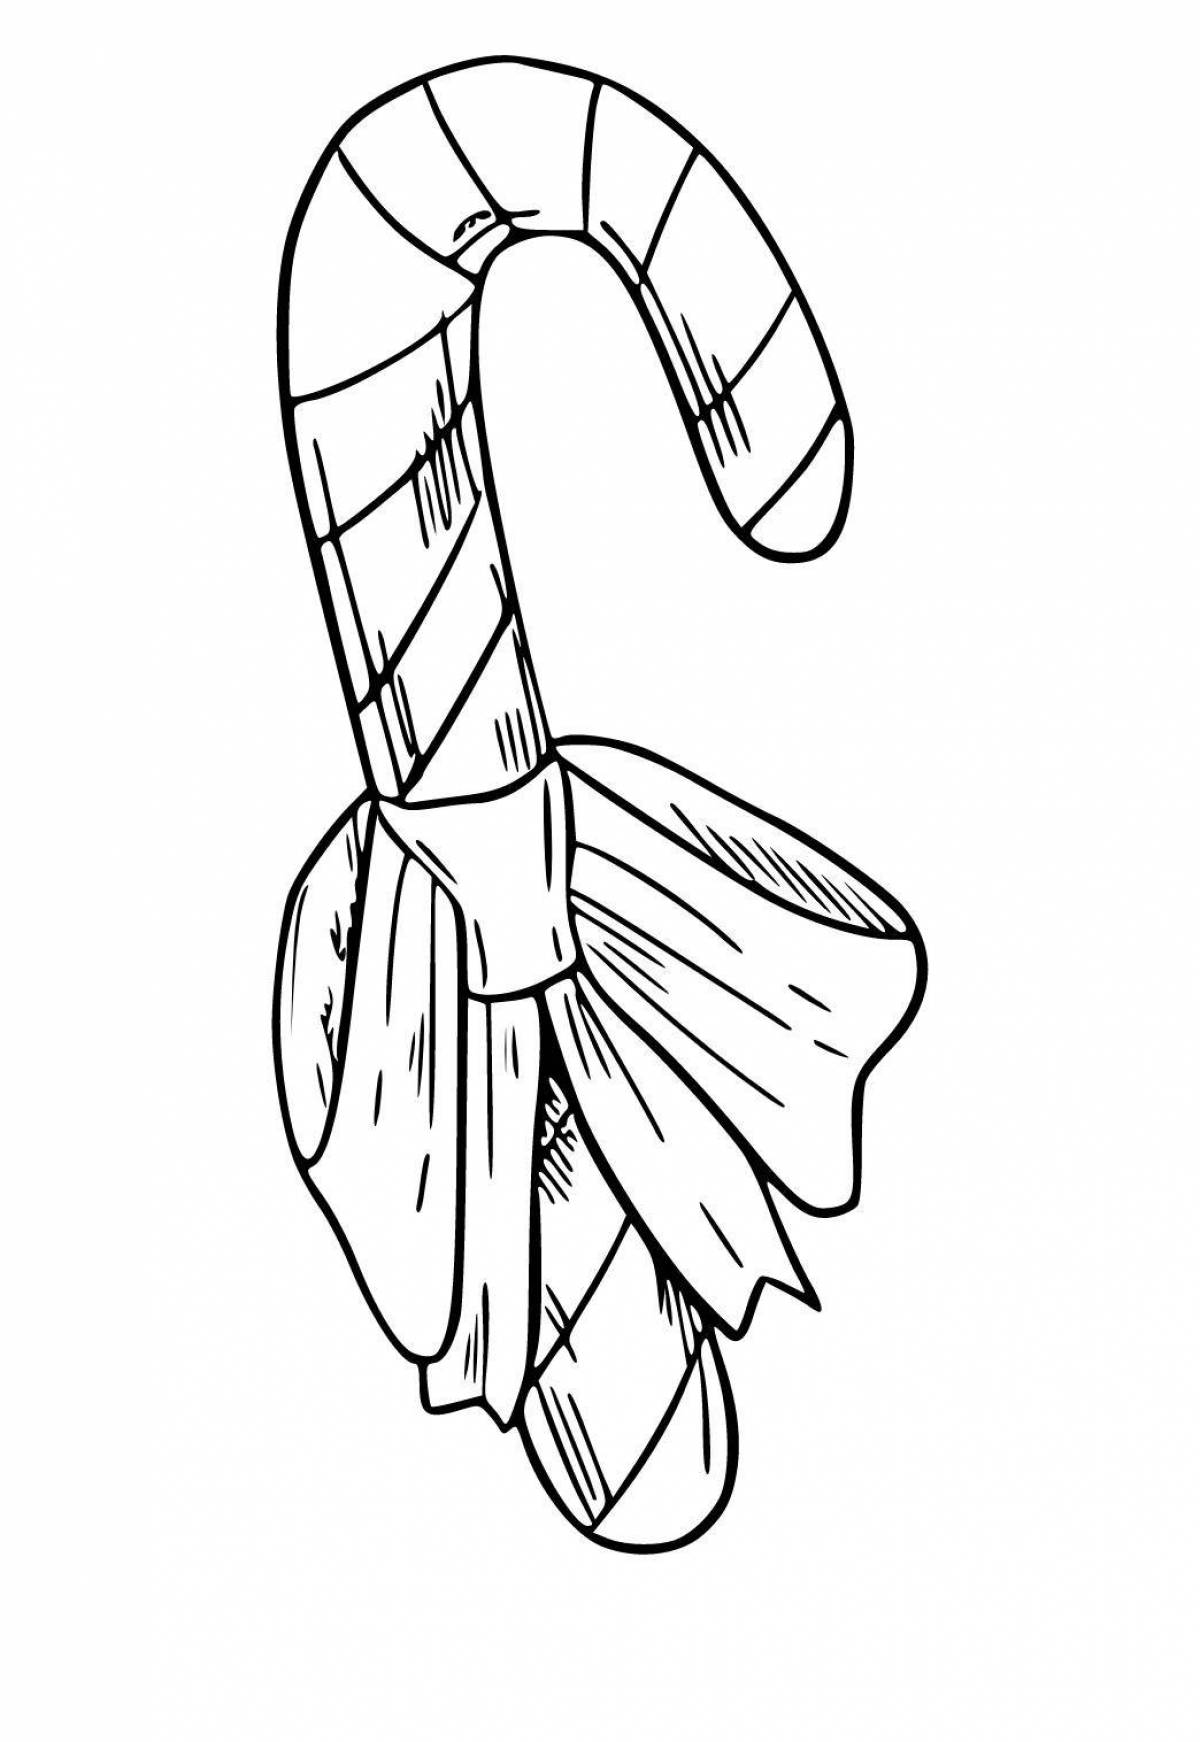 Sparkling candy cane coloring page